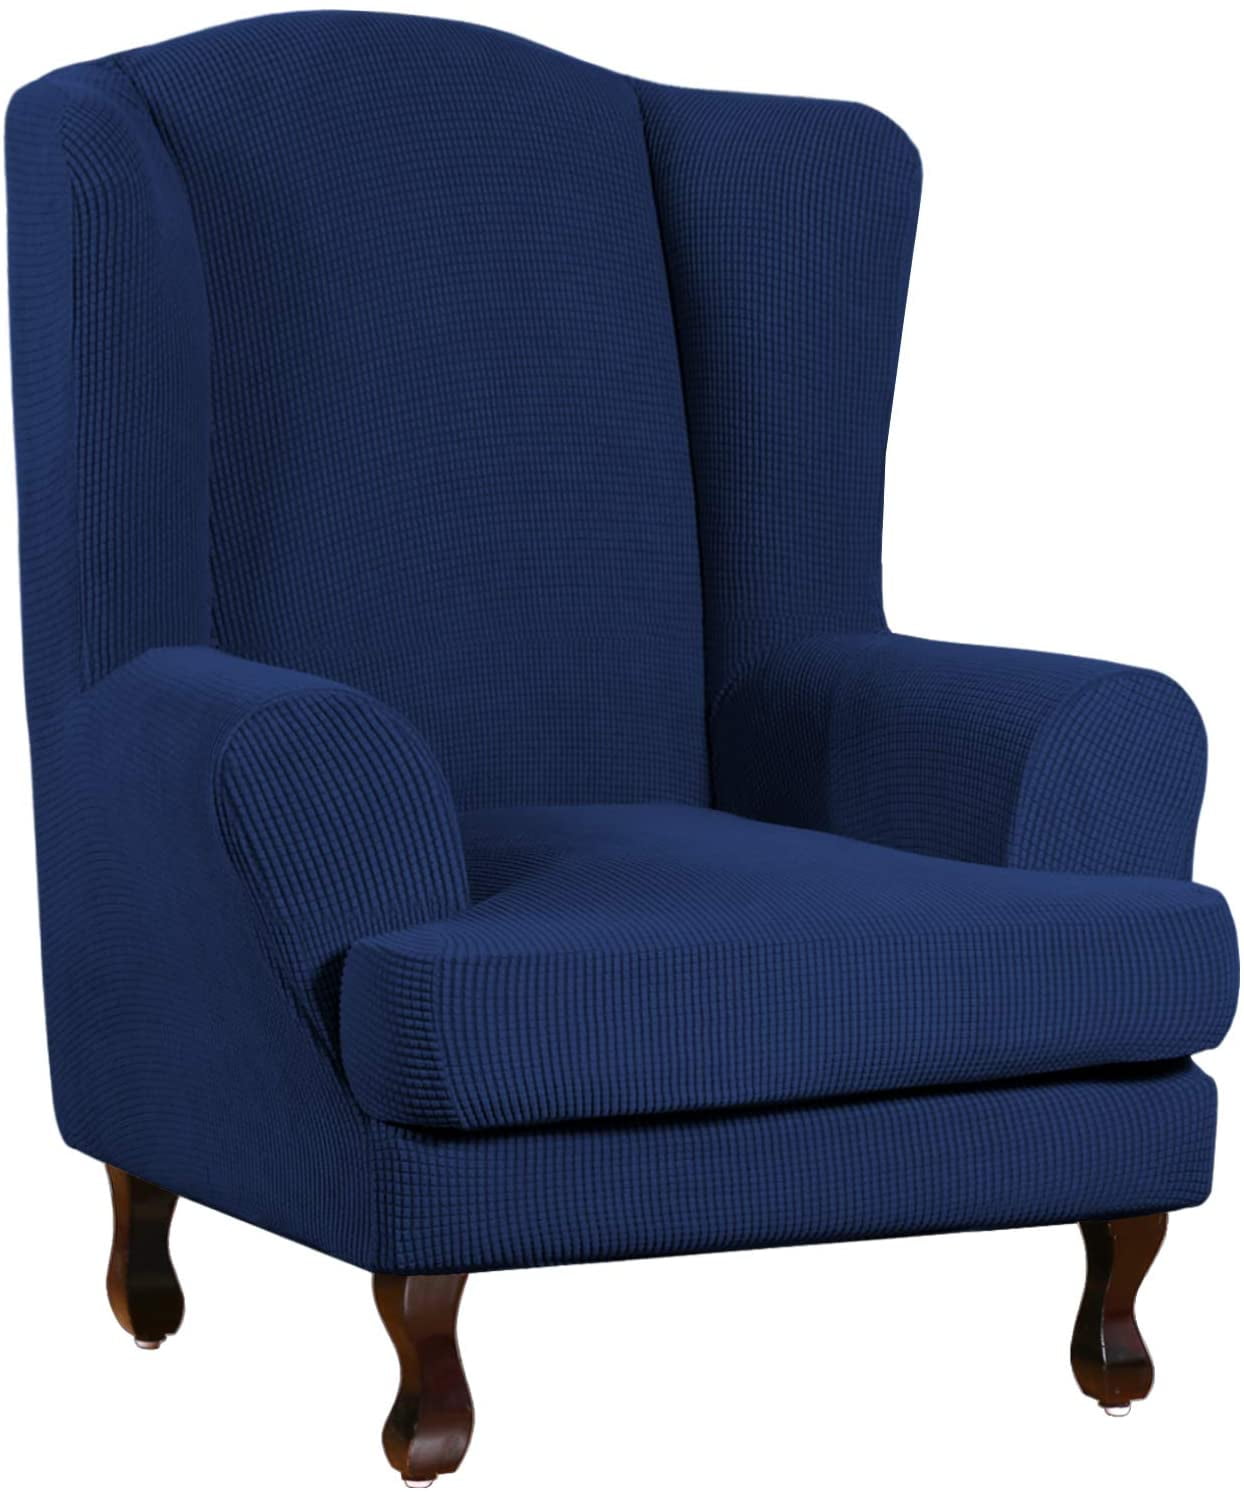 Details about   Stretch Wing Chair Slipcover Wingback Armchair Chair Slipcovers Sofa Covers 